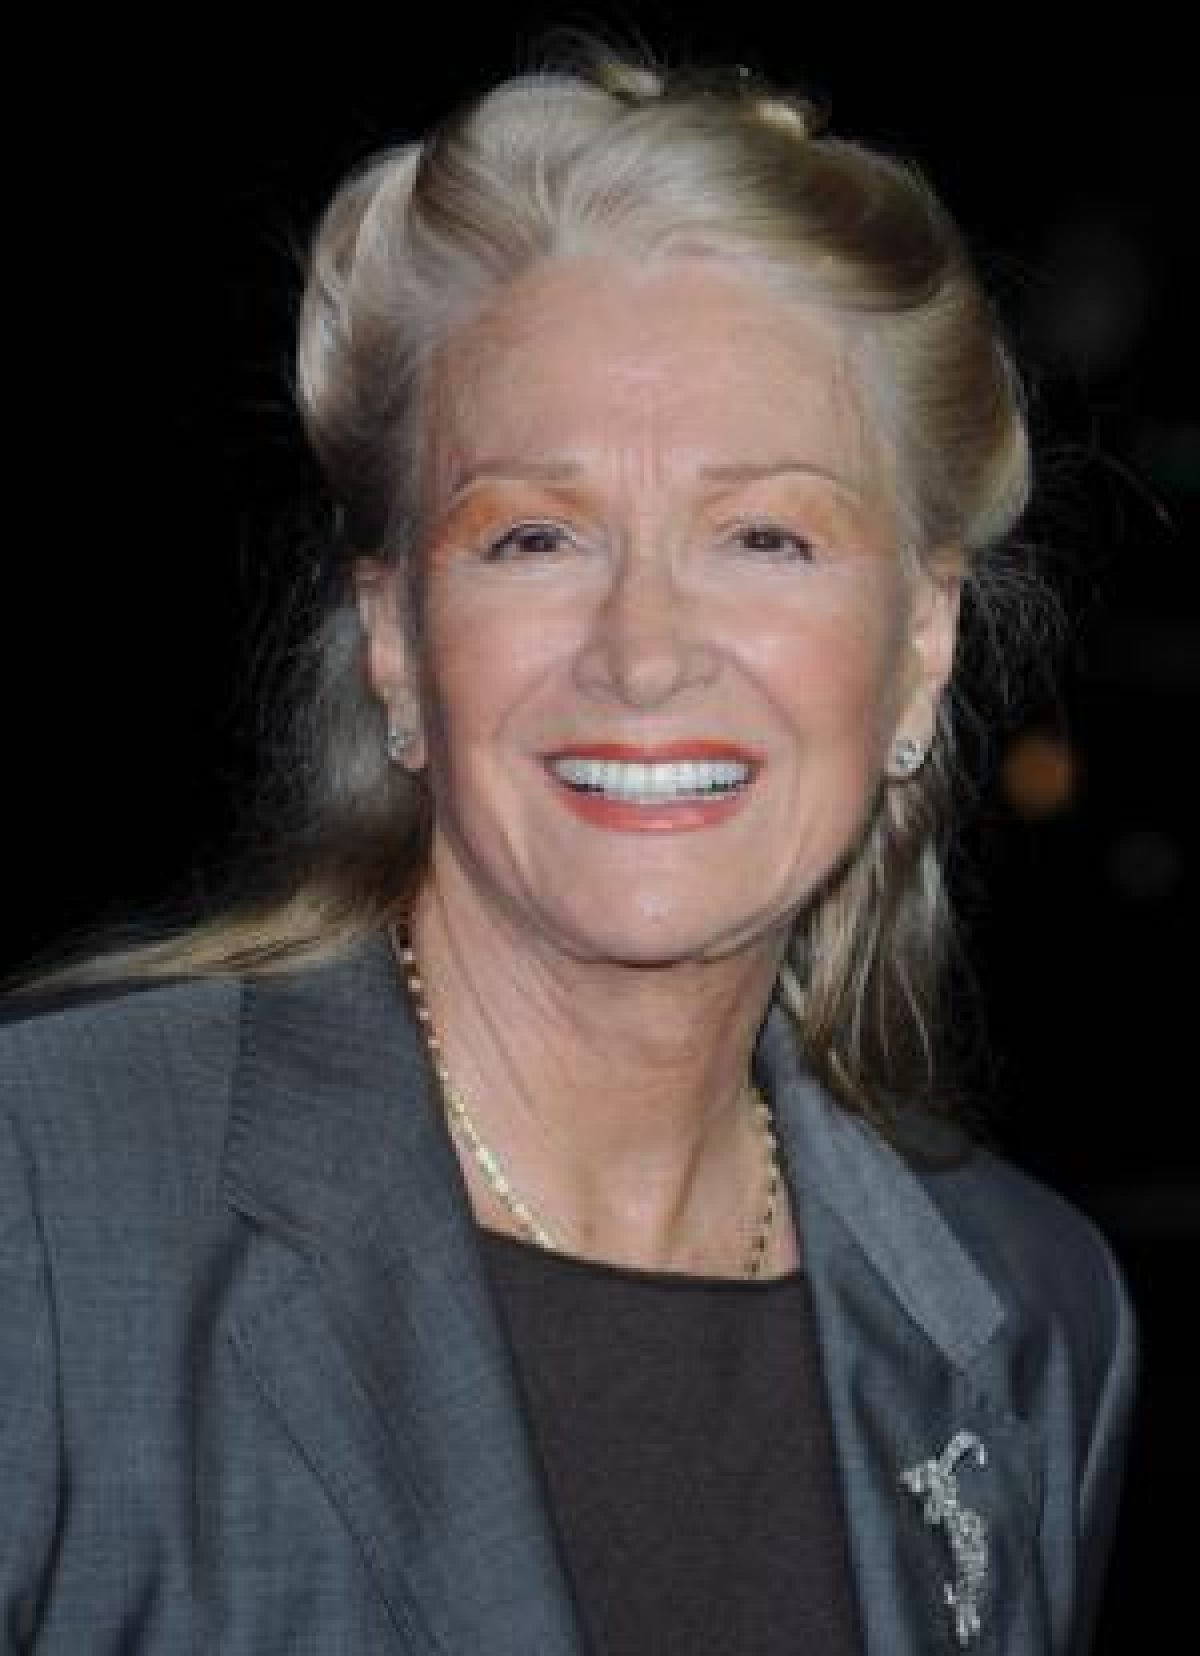 Cheryl ladd related to diane ladd